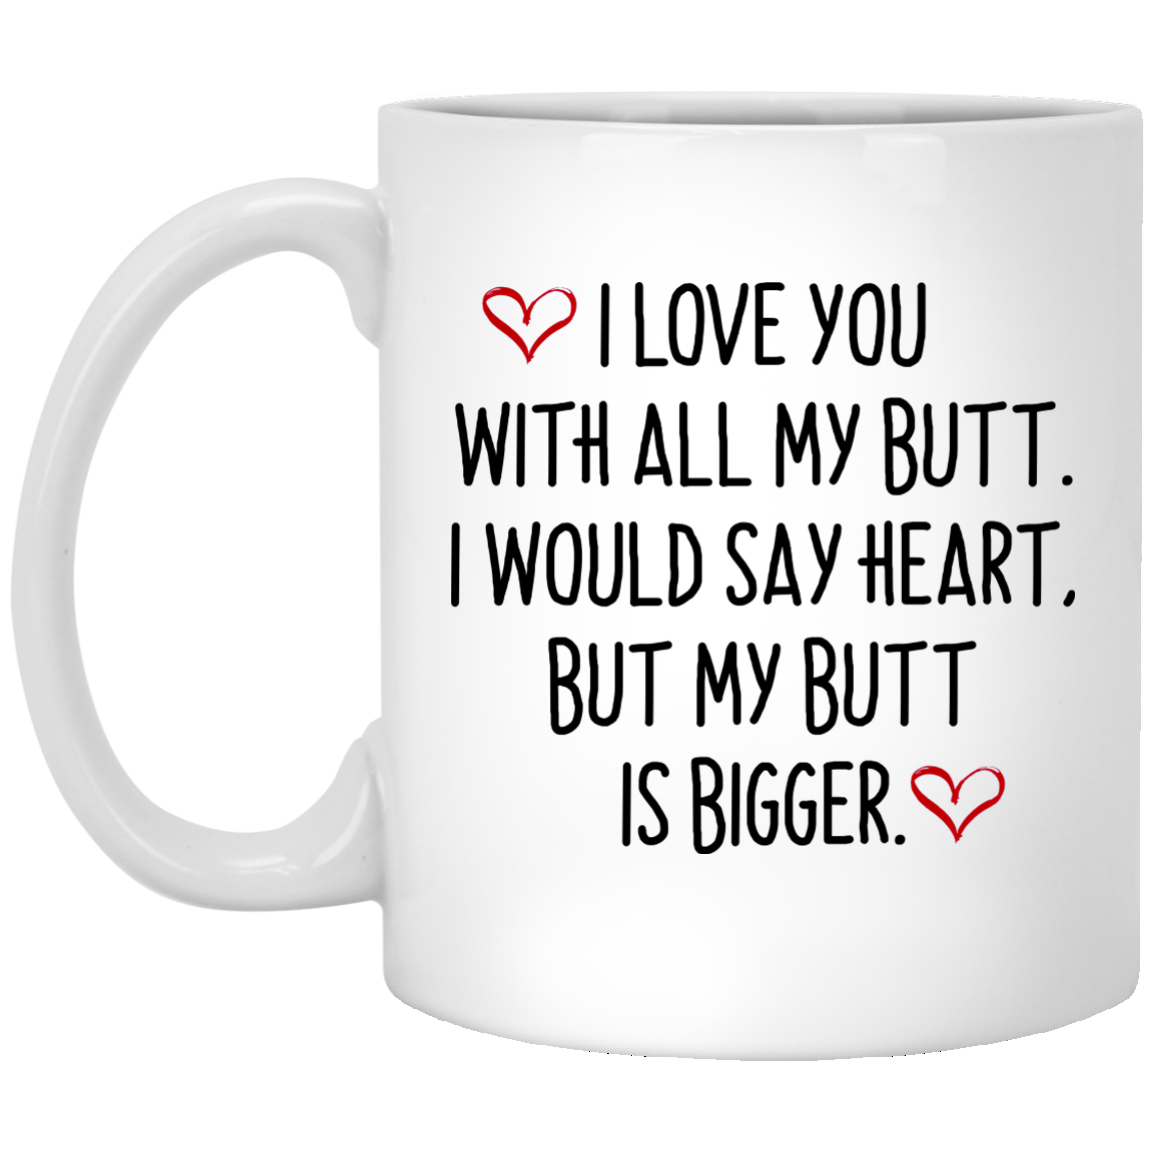 I love you with all my butt. I would say heart but my butt is bigger coffee mug